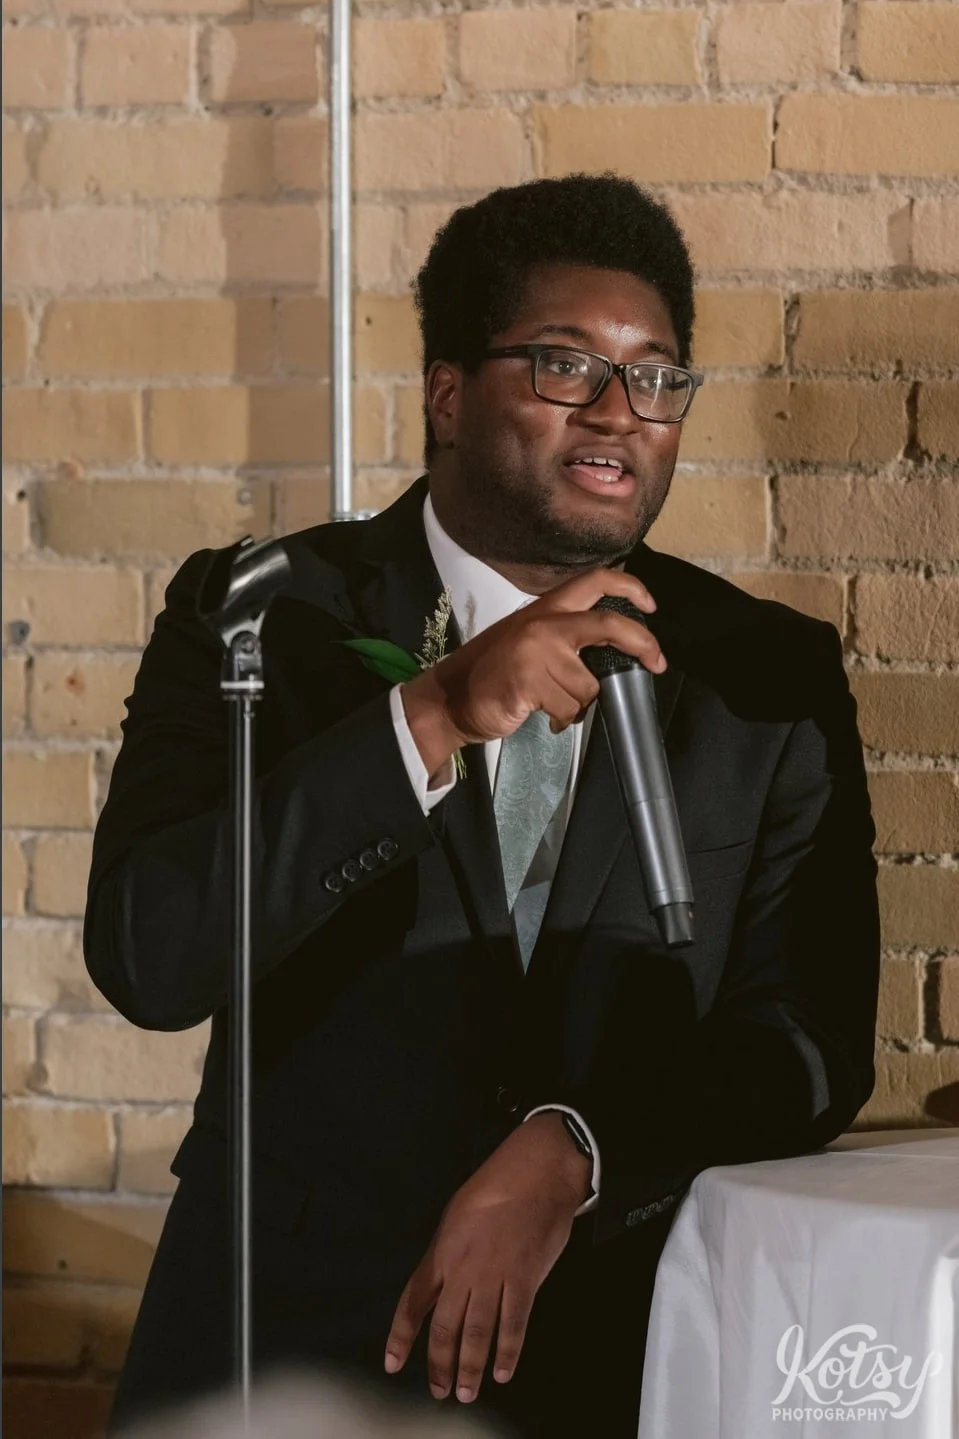 A man wearing a black suit and green tie speaks into a microphone in front of a brick wall during a Second Floor Events wedding reception in Toronto, Canada.